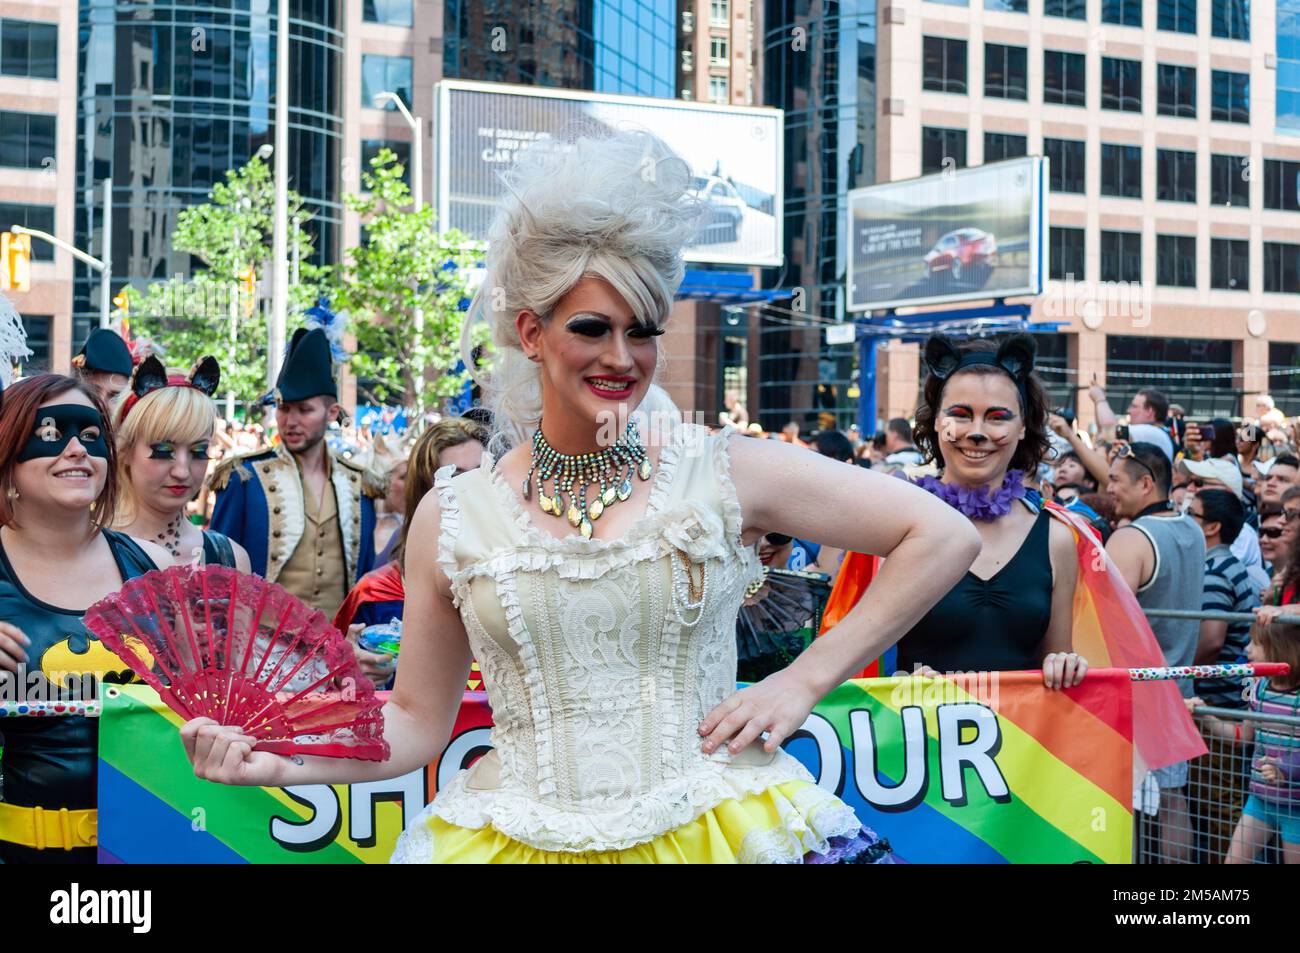 A drag queen walks in Bloor St. leading a group of people. She is part of the annual event celebrating the LGBTQ+ community in the city. Stock Photo